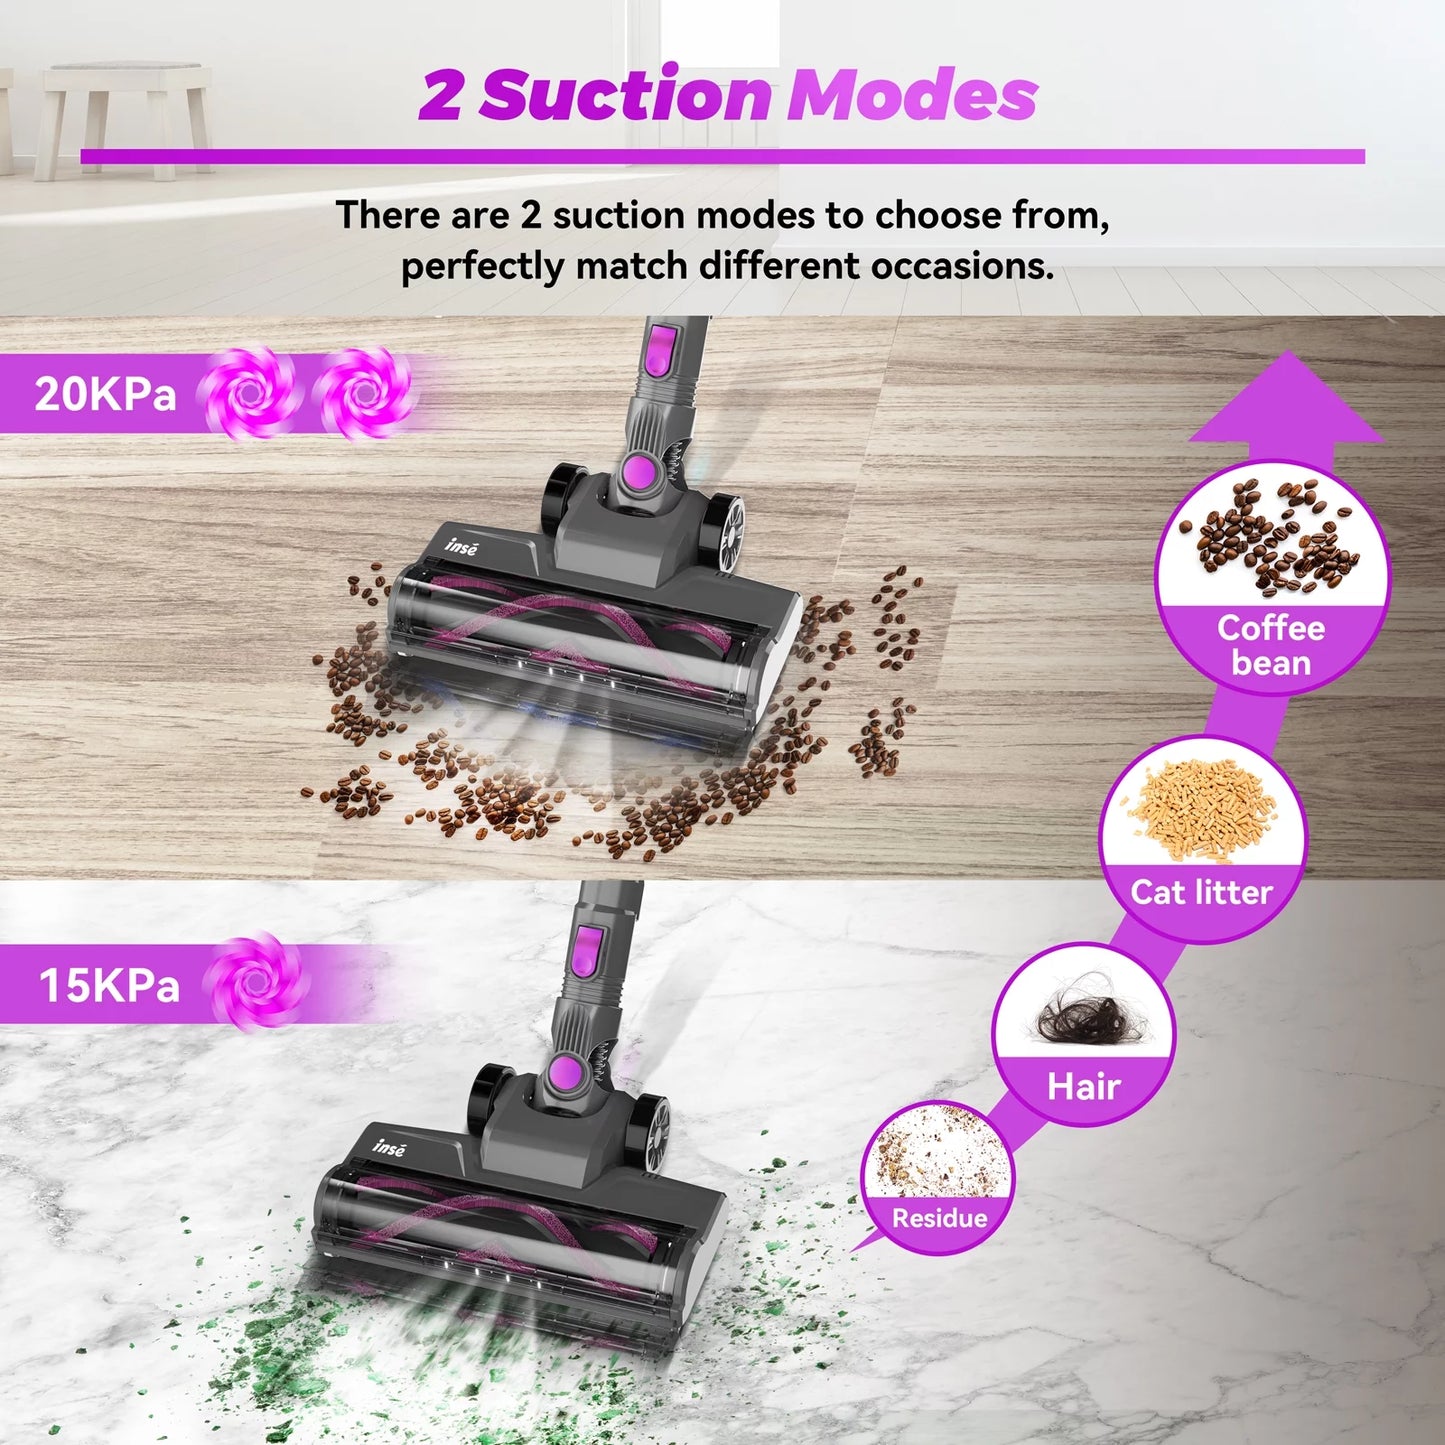 Cordless Vacuum Cleaner,6 in 1 Powerful Stick Handheld Vacuum with 2200Mah Rechargeable Battery,20Kpa Vacuum Cleaner,40Min Runtime,Lightweight Cordless Stick Vacuum for Hard Floor Carpet Pet Hair - Design By Technique